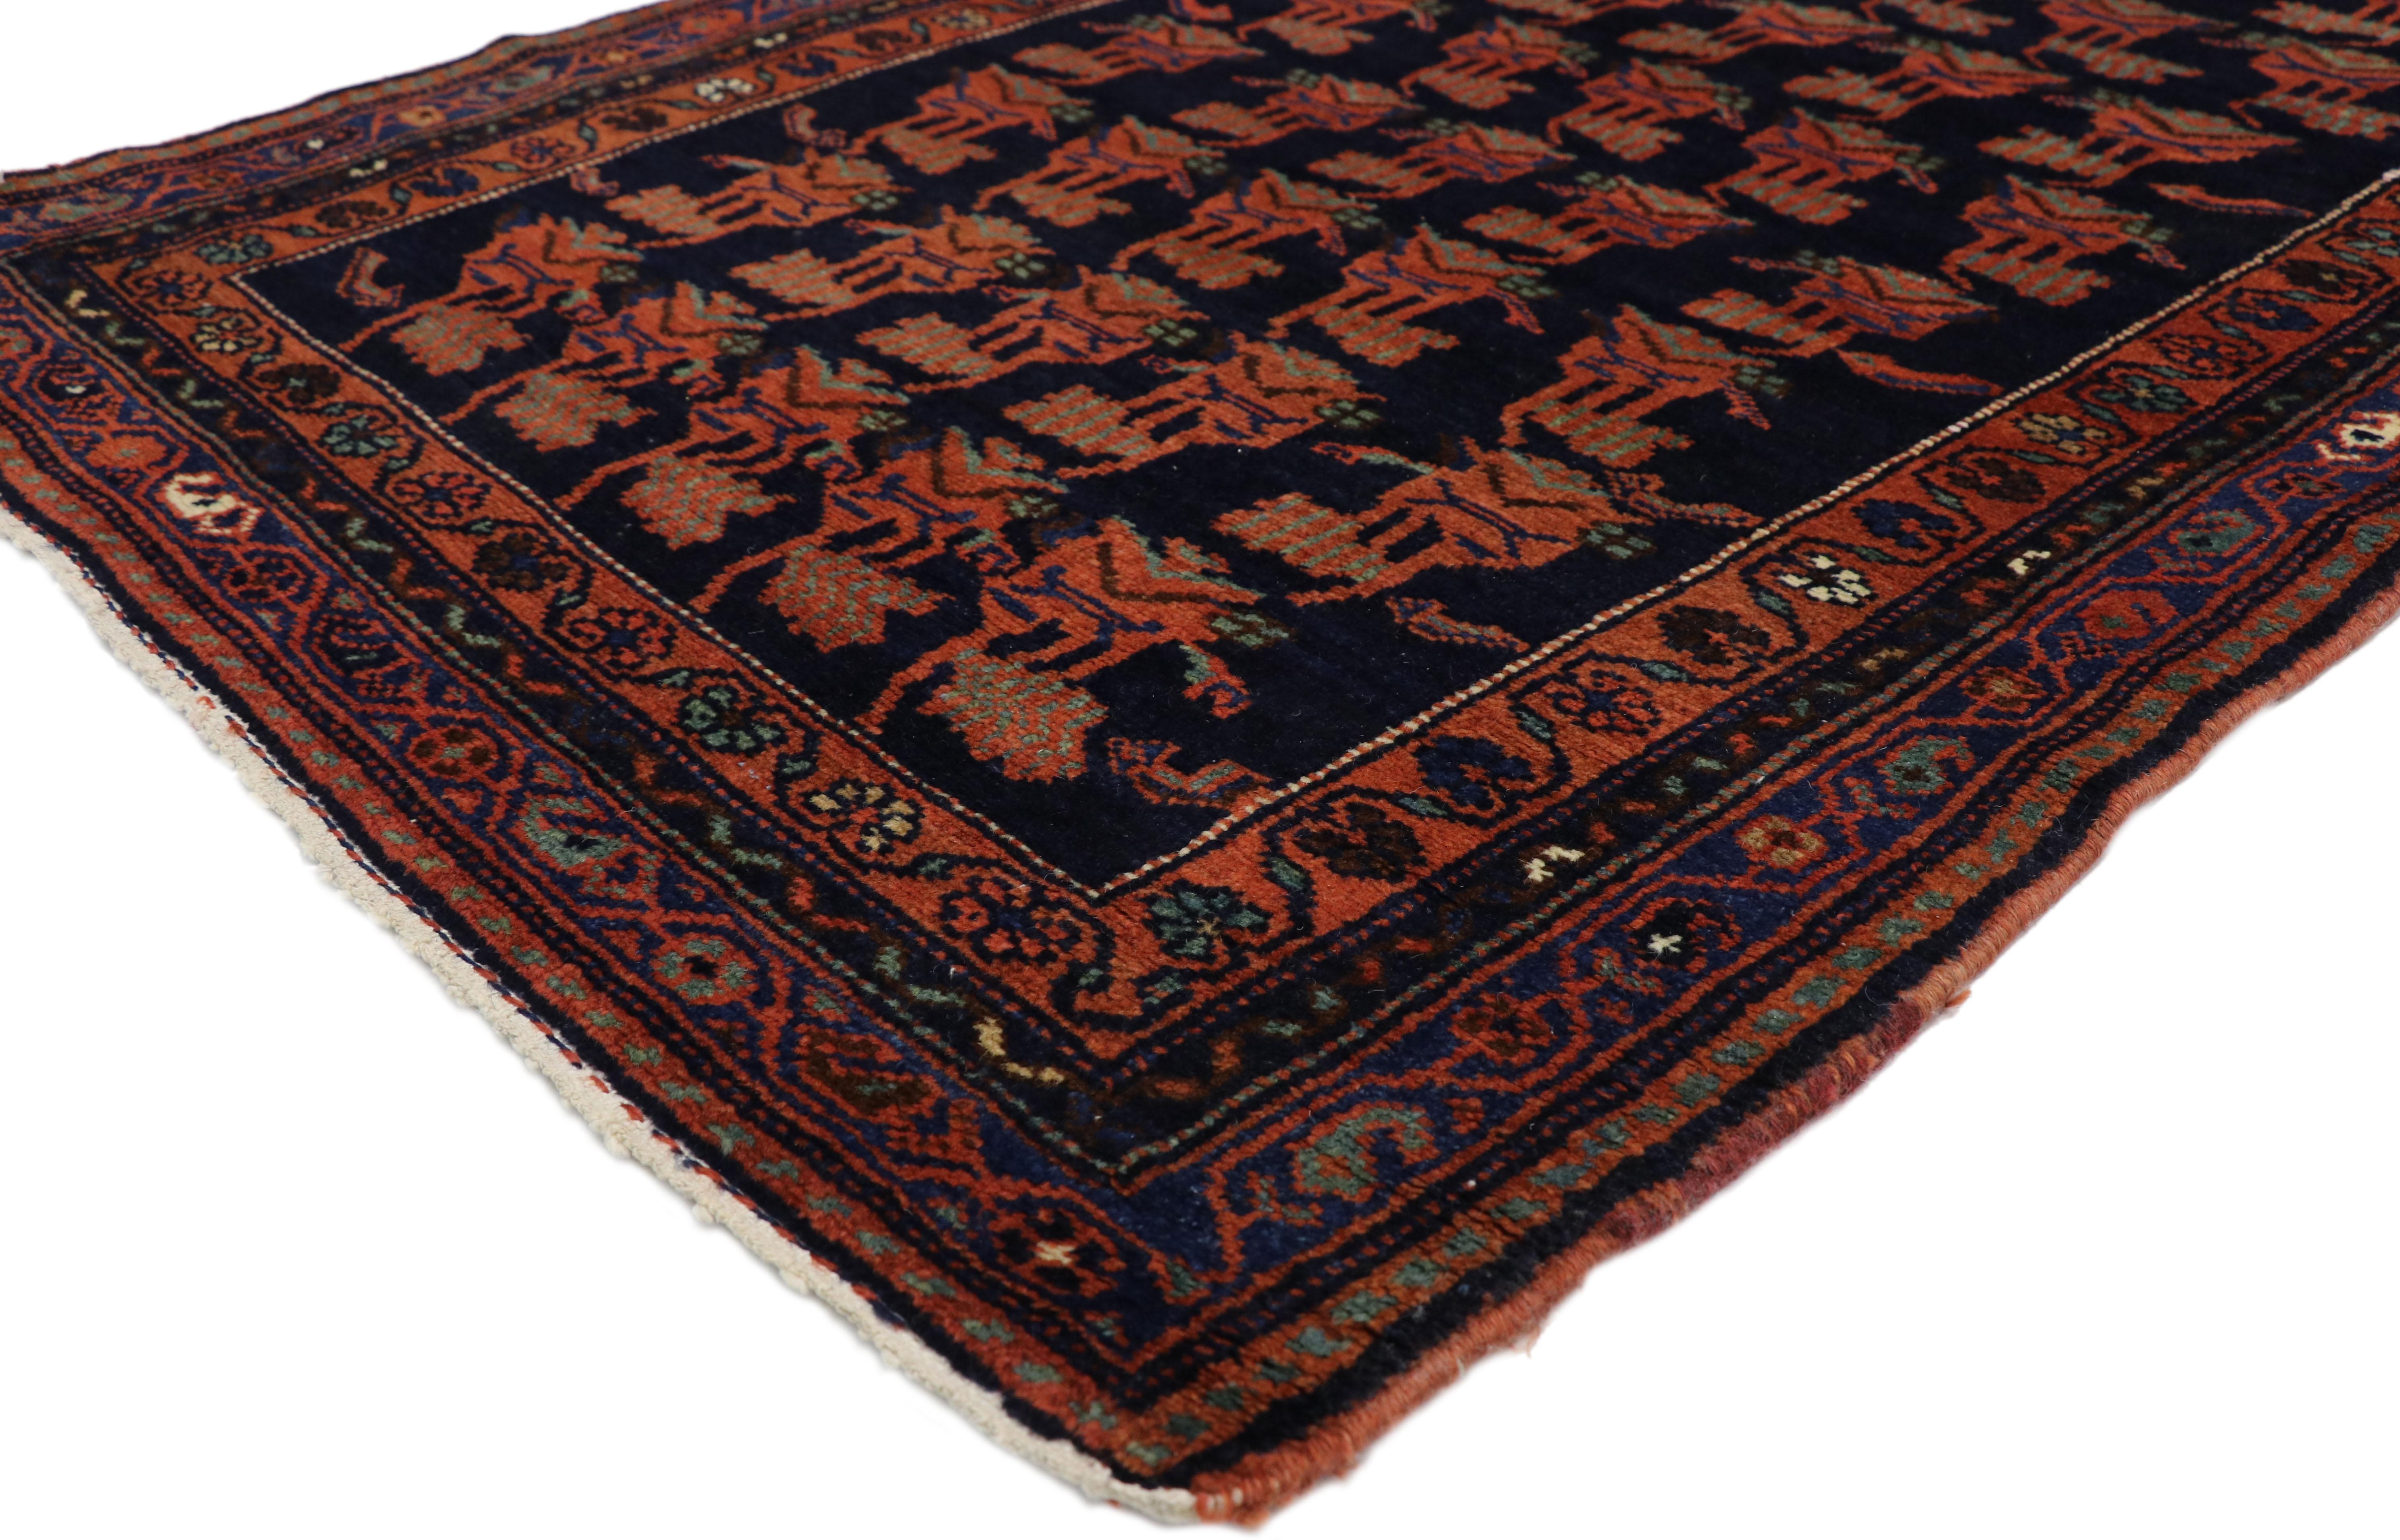 75381, antique Persian Azerbaijan runner with Modern Federal style. With its clean lines and subtle use of ornament, this hand knotted wool antique Persian Azerbaijan runner beautifully embodies classically refined Federal style. The Persian